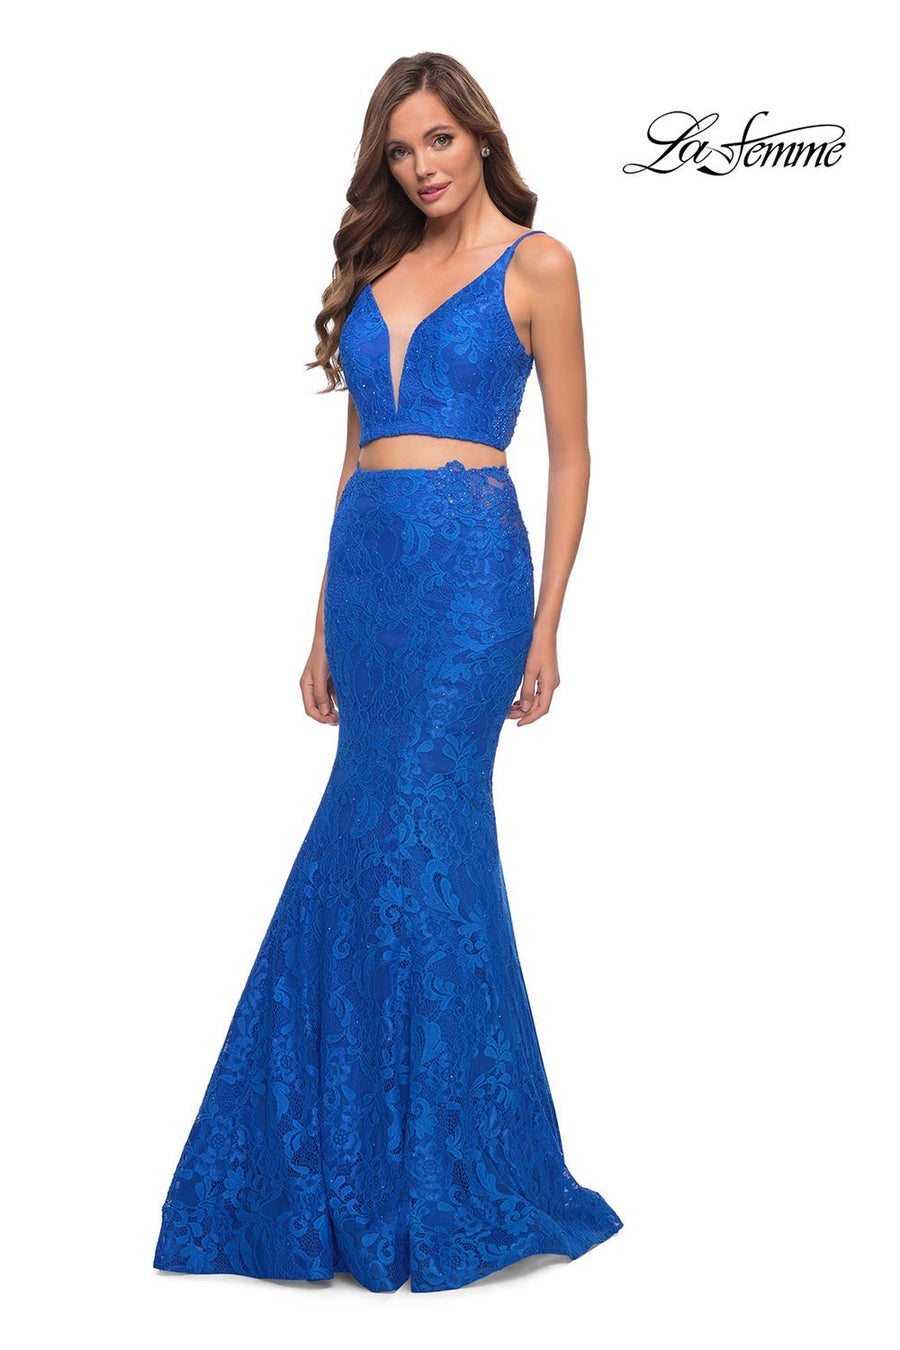 La Femme 29970 prom dress images.  La Femme 29970 is available in these colors: Pale Yellow, Royal Blue.